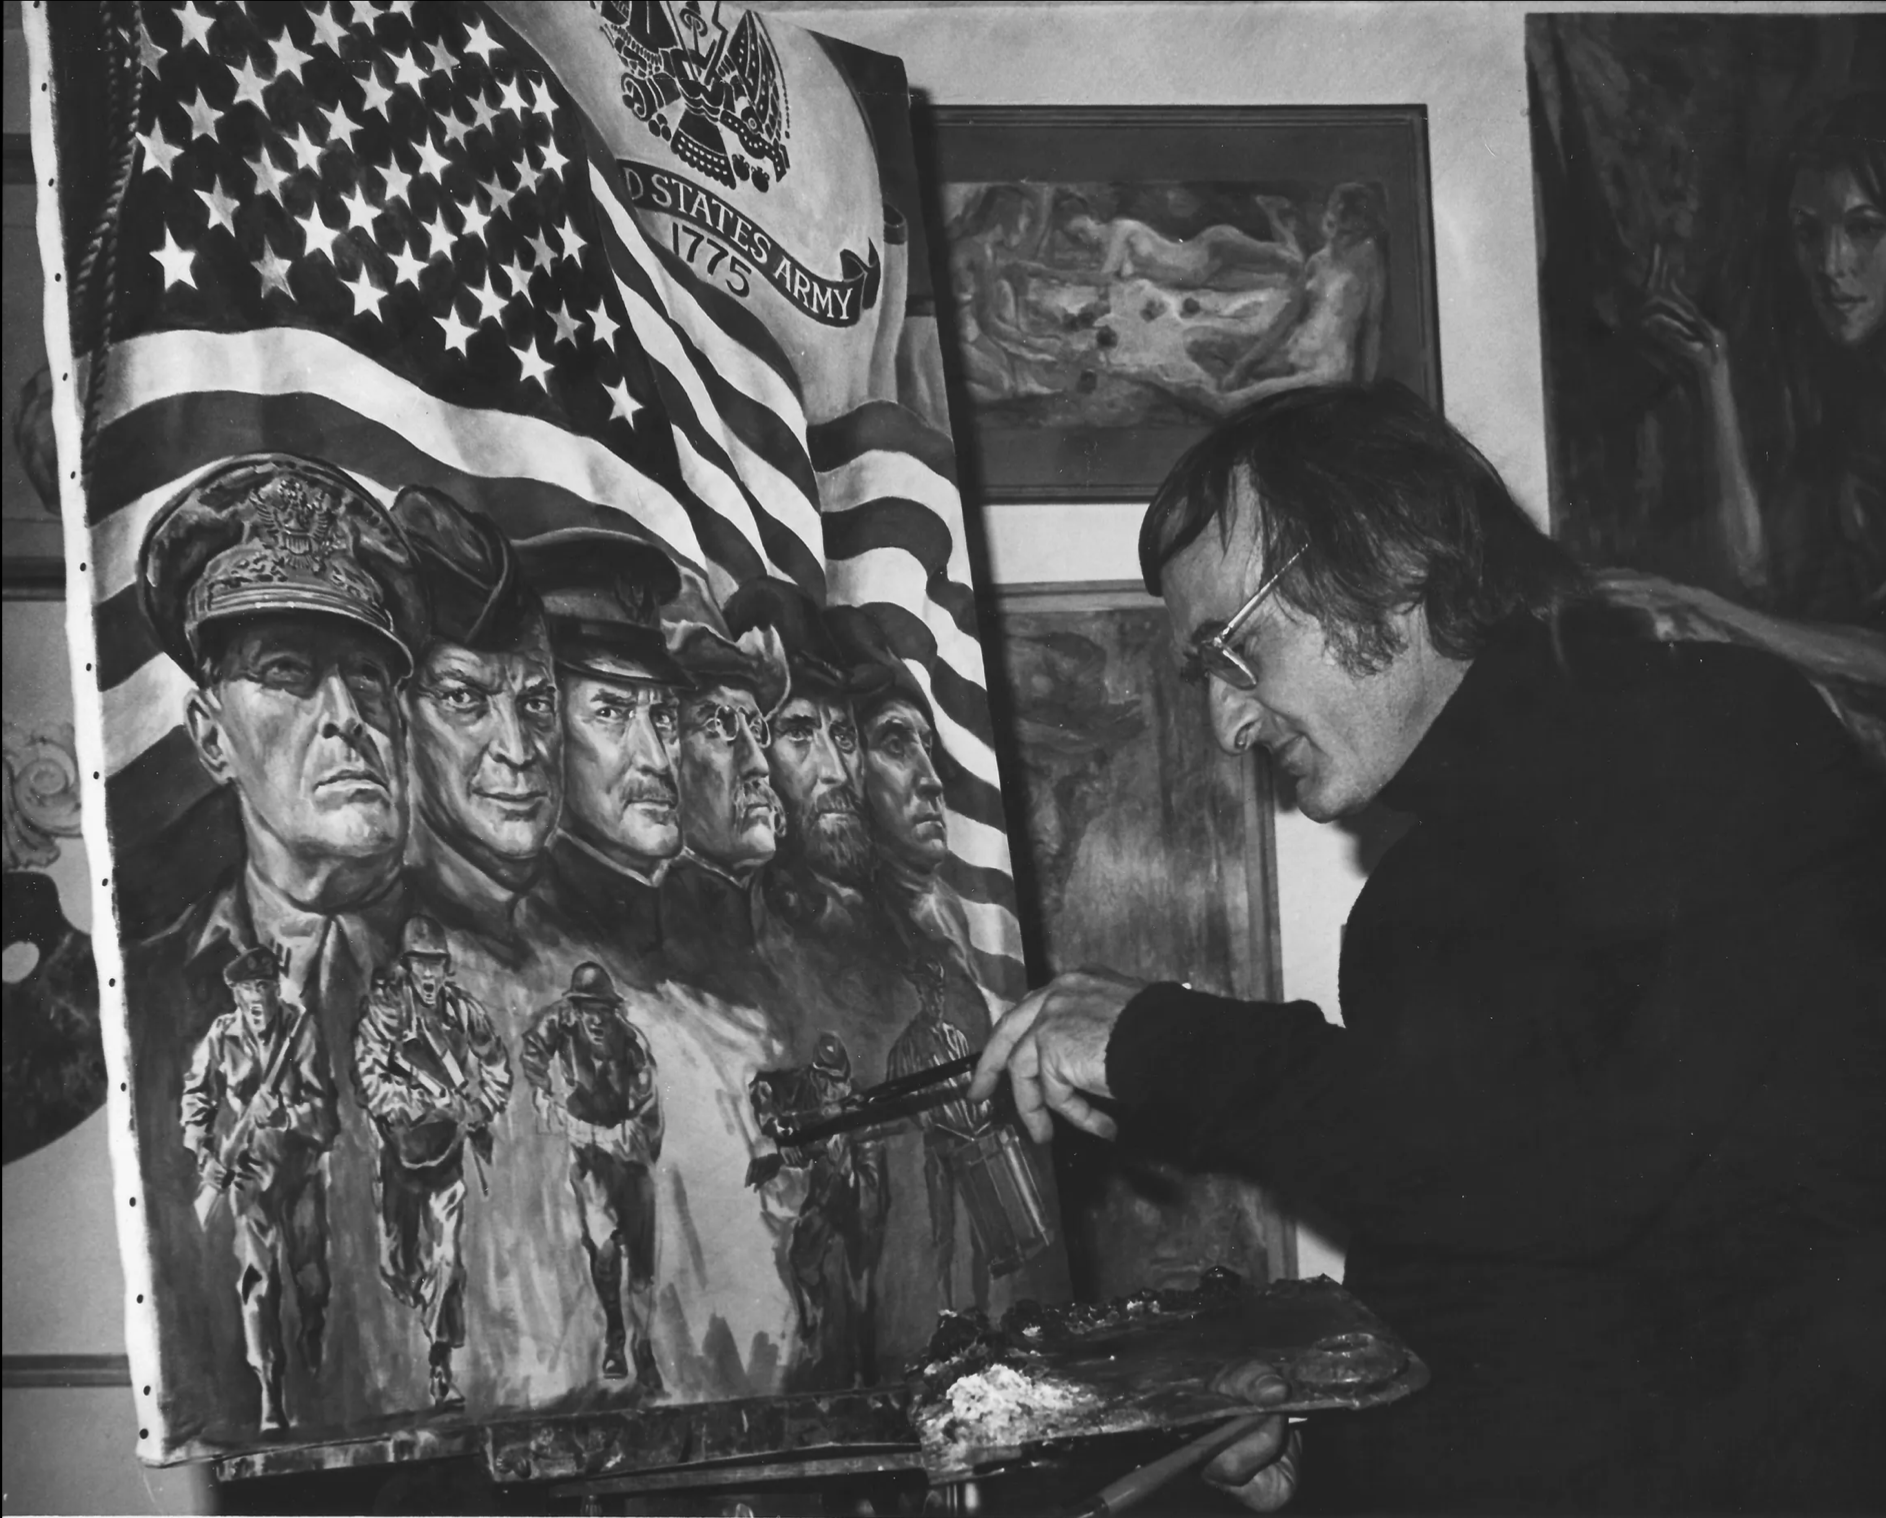 Gebr painting for President Gerald Ford's oval office in 1977, commemorating the U.S. Army's 200th Anniversary